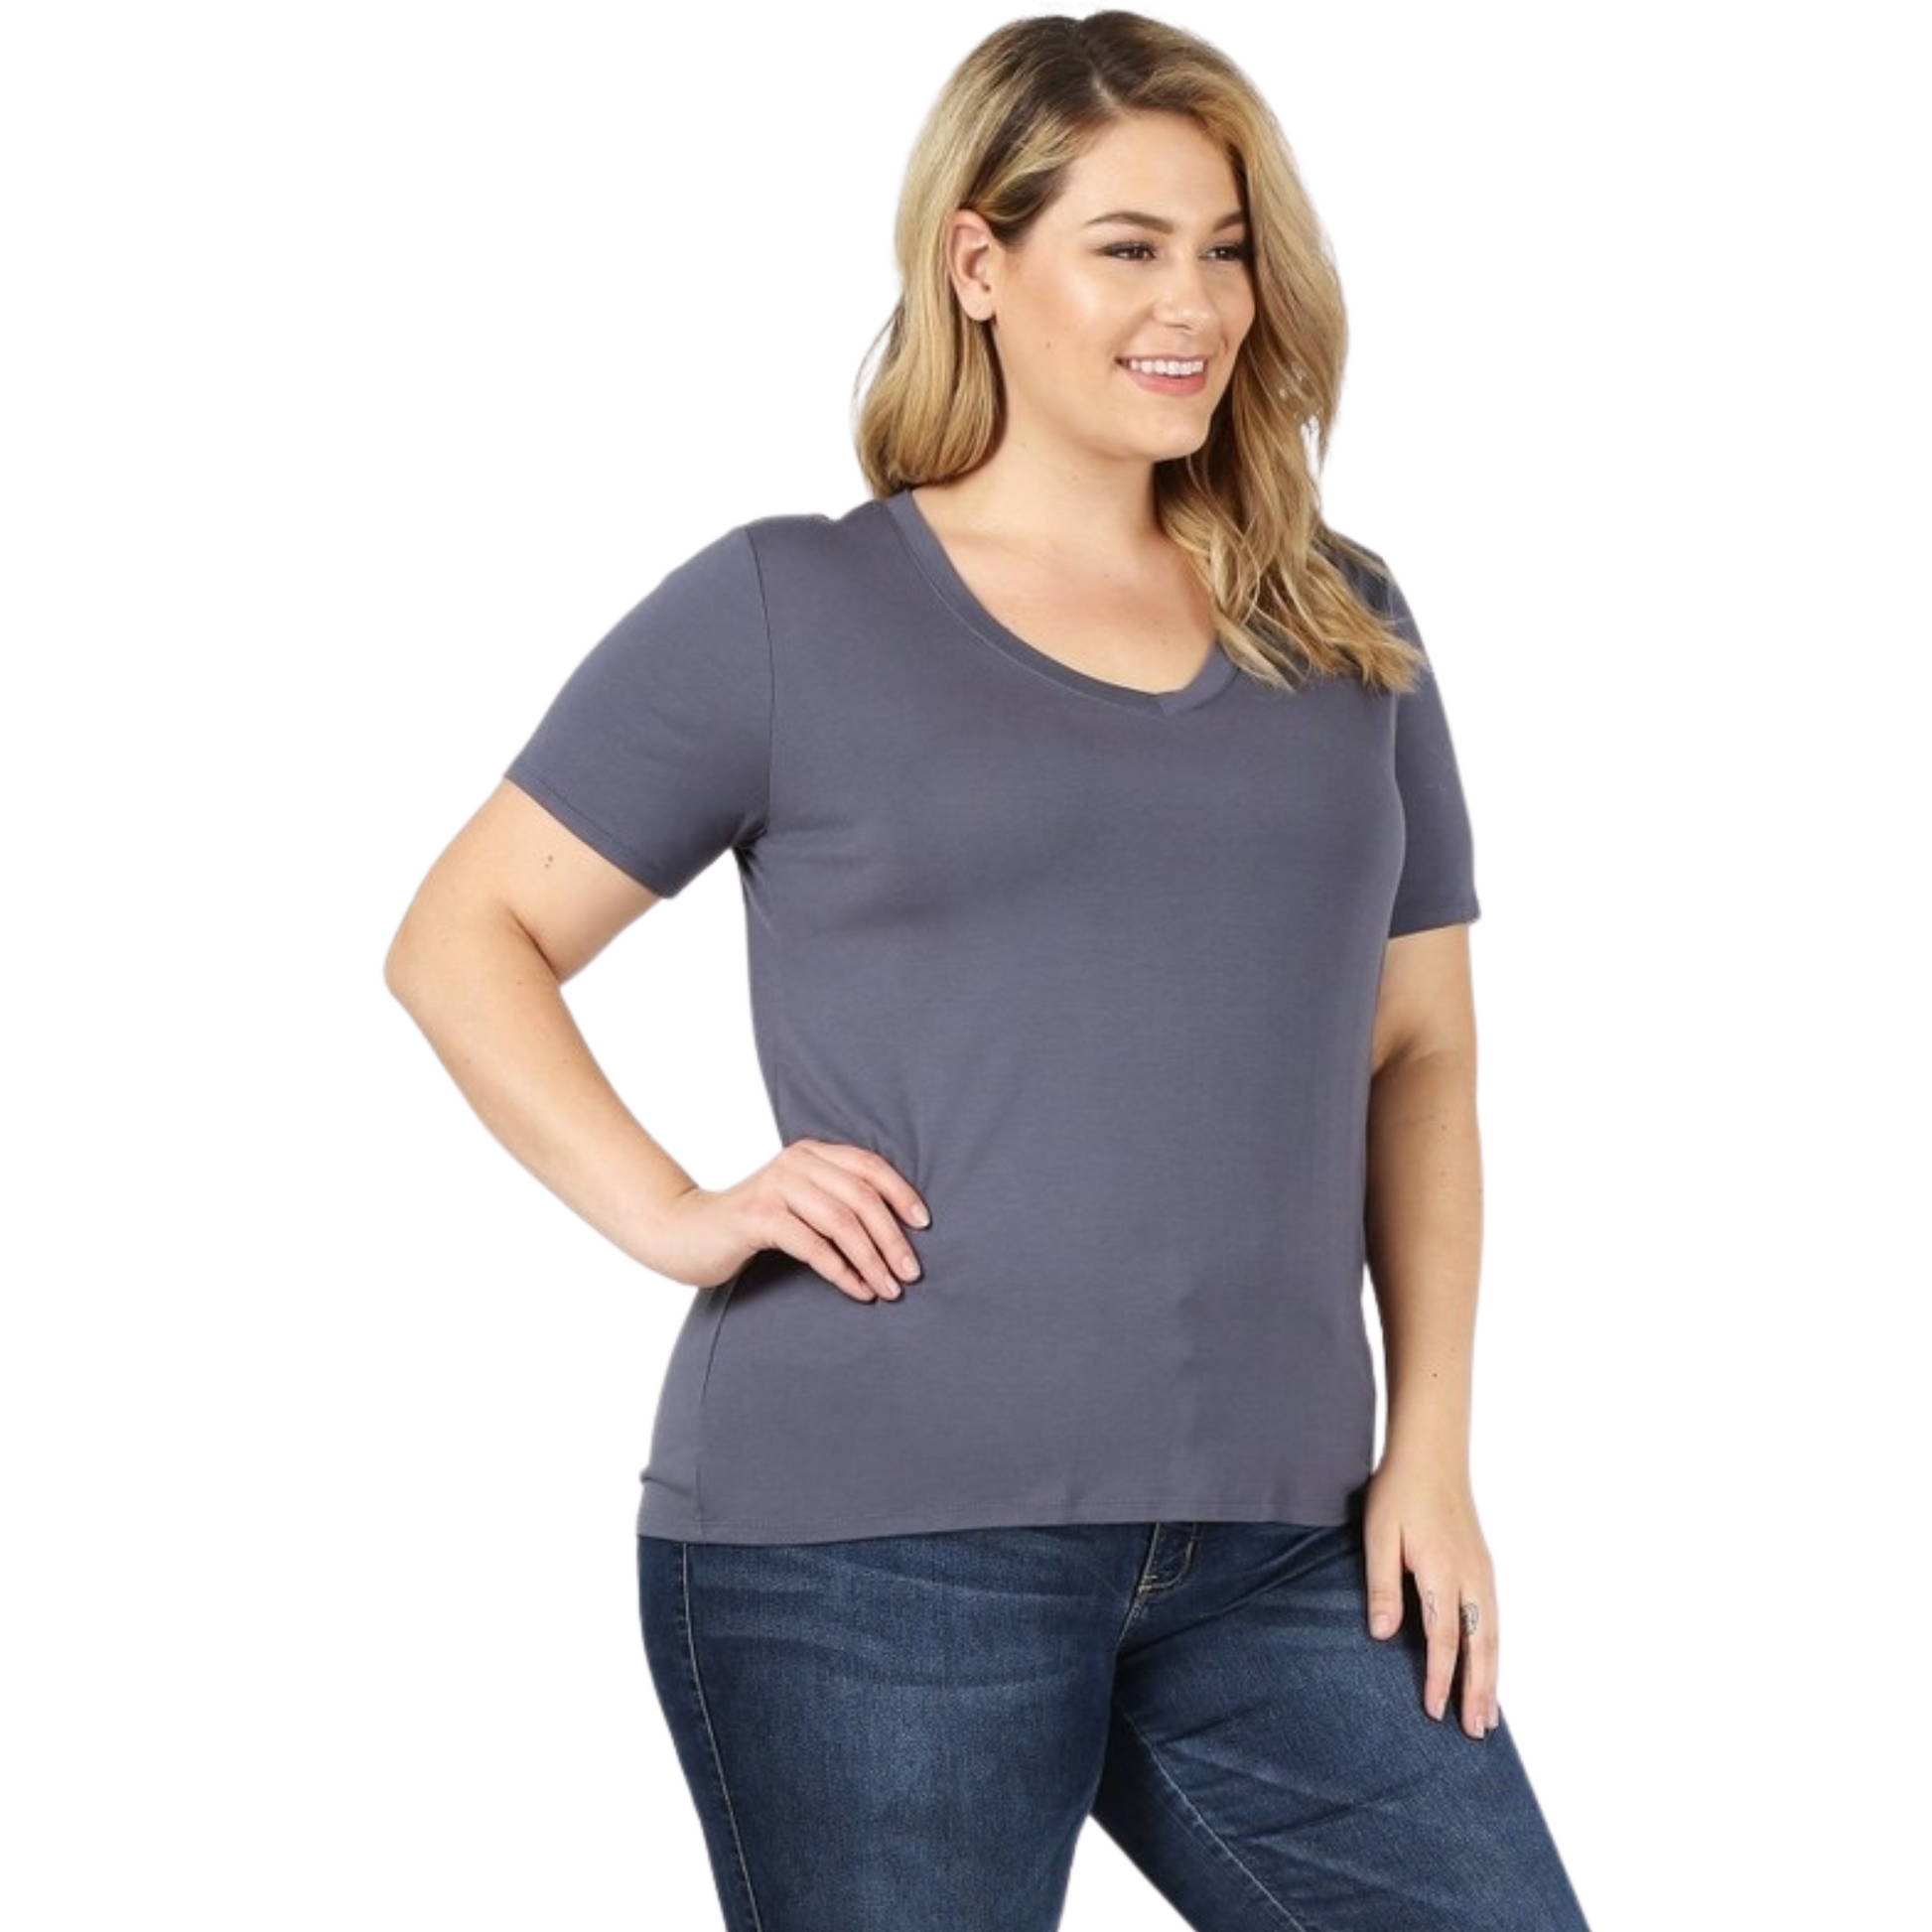 Plus size v-neck tee in grey